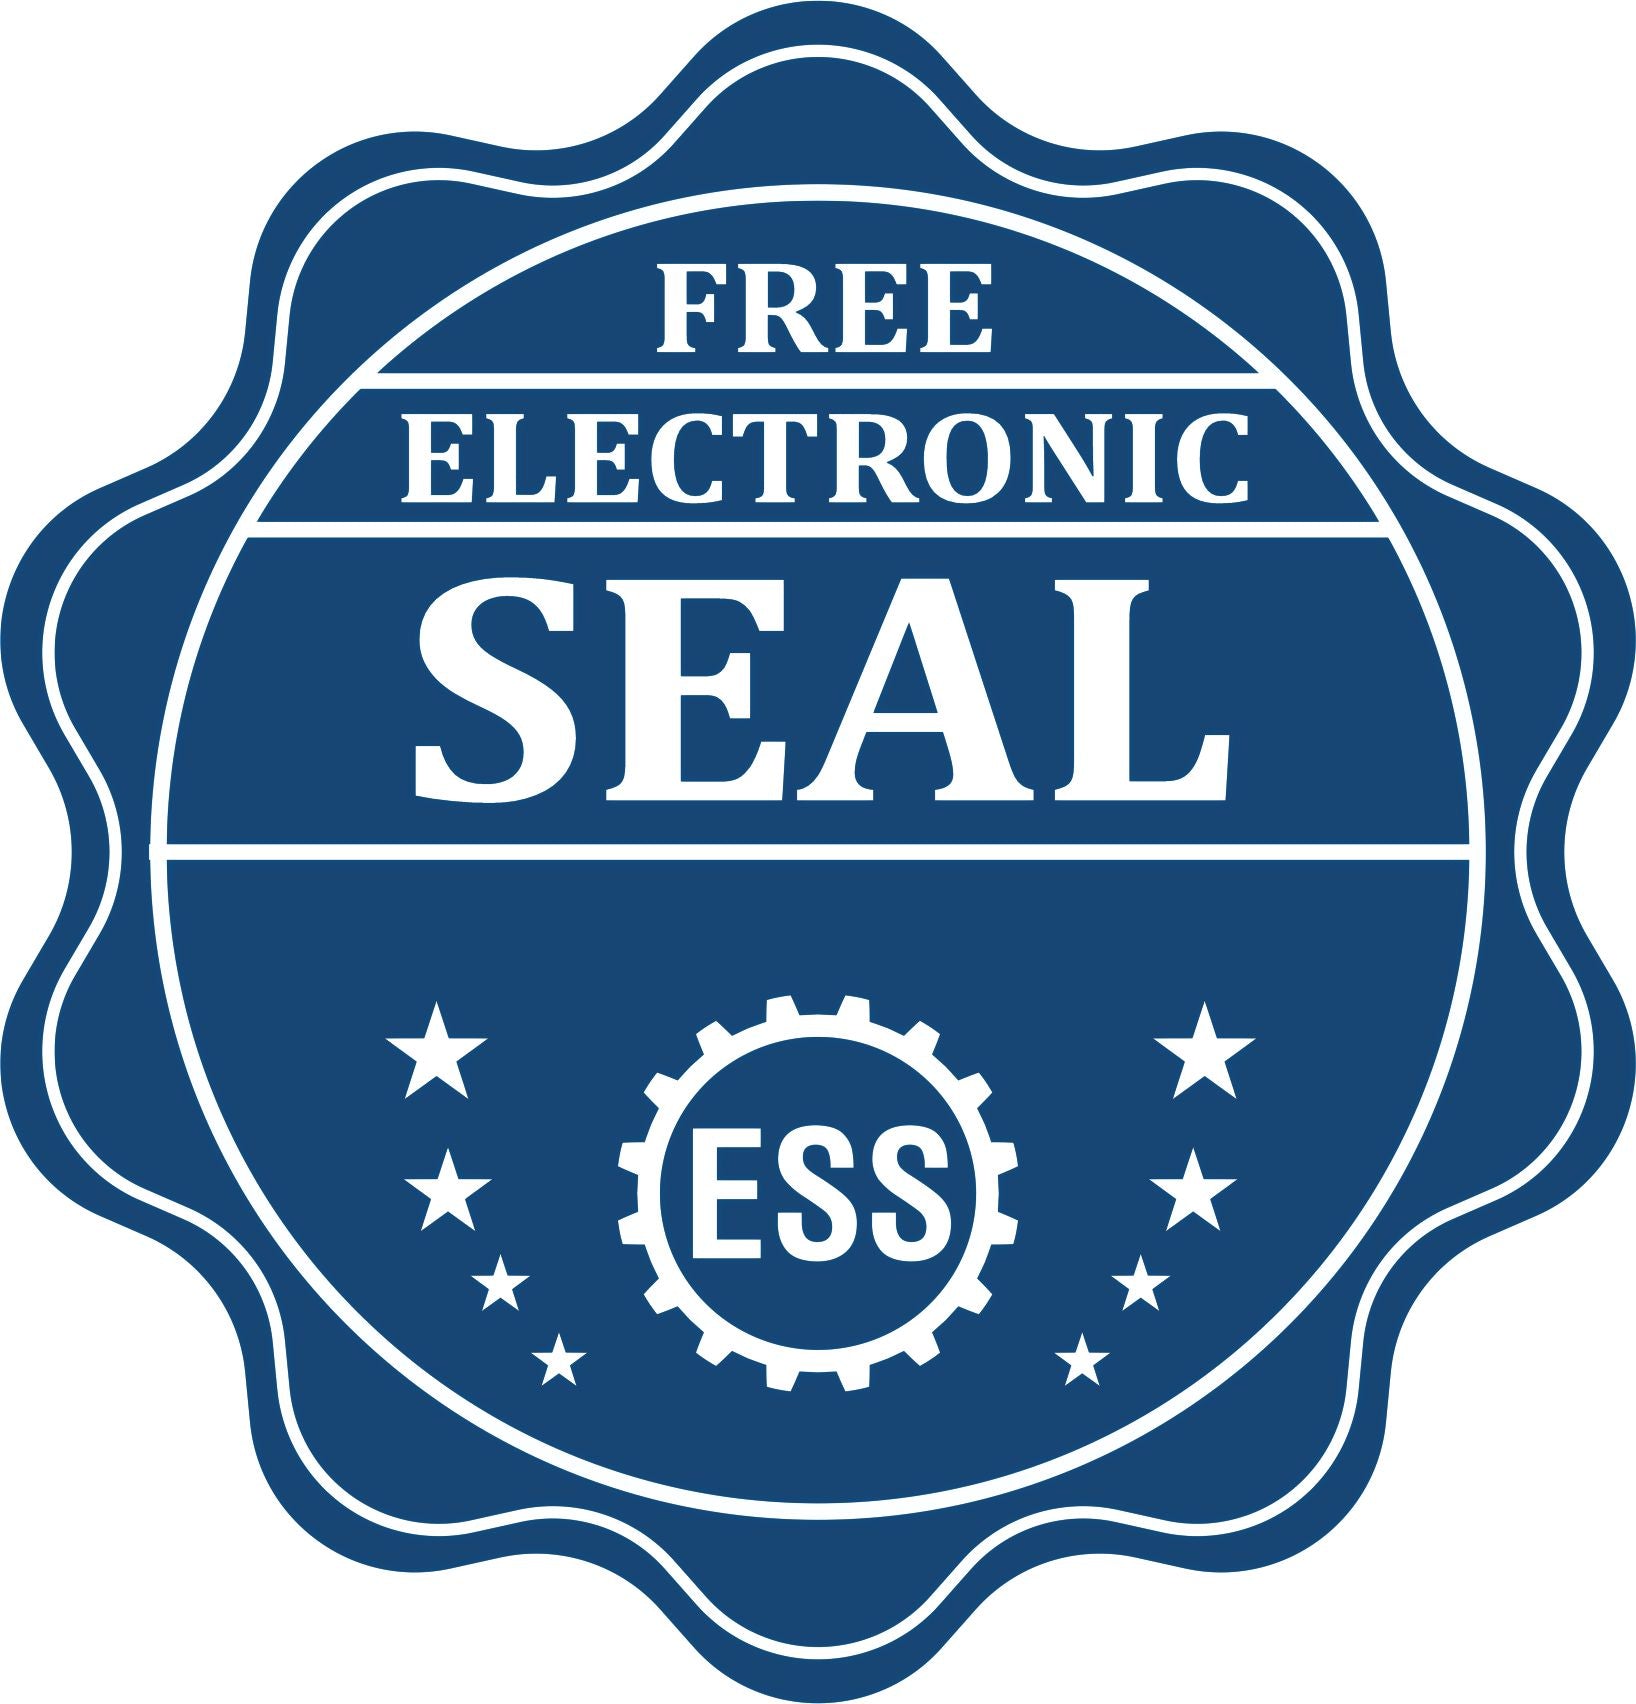 A badge showing a free electronic seal for the State of Colorado Extended Long Reach Geologist Seal with stars and the ESS gear on the emblem.